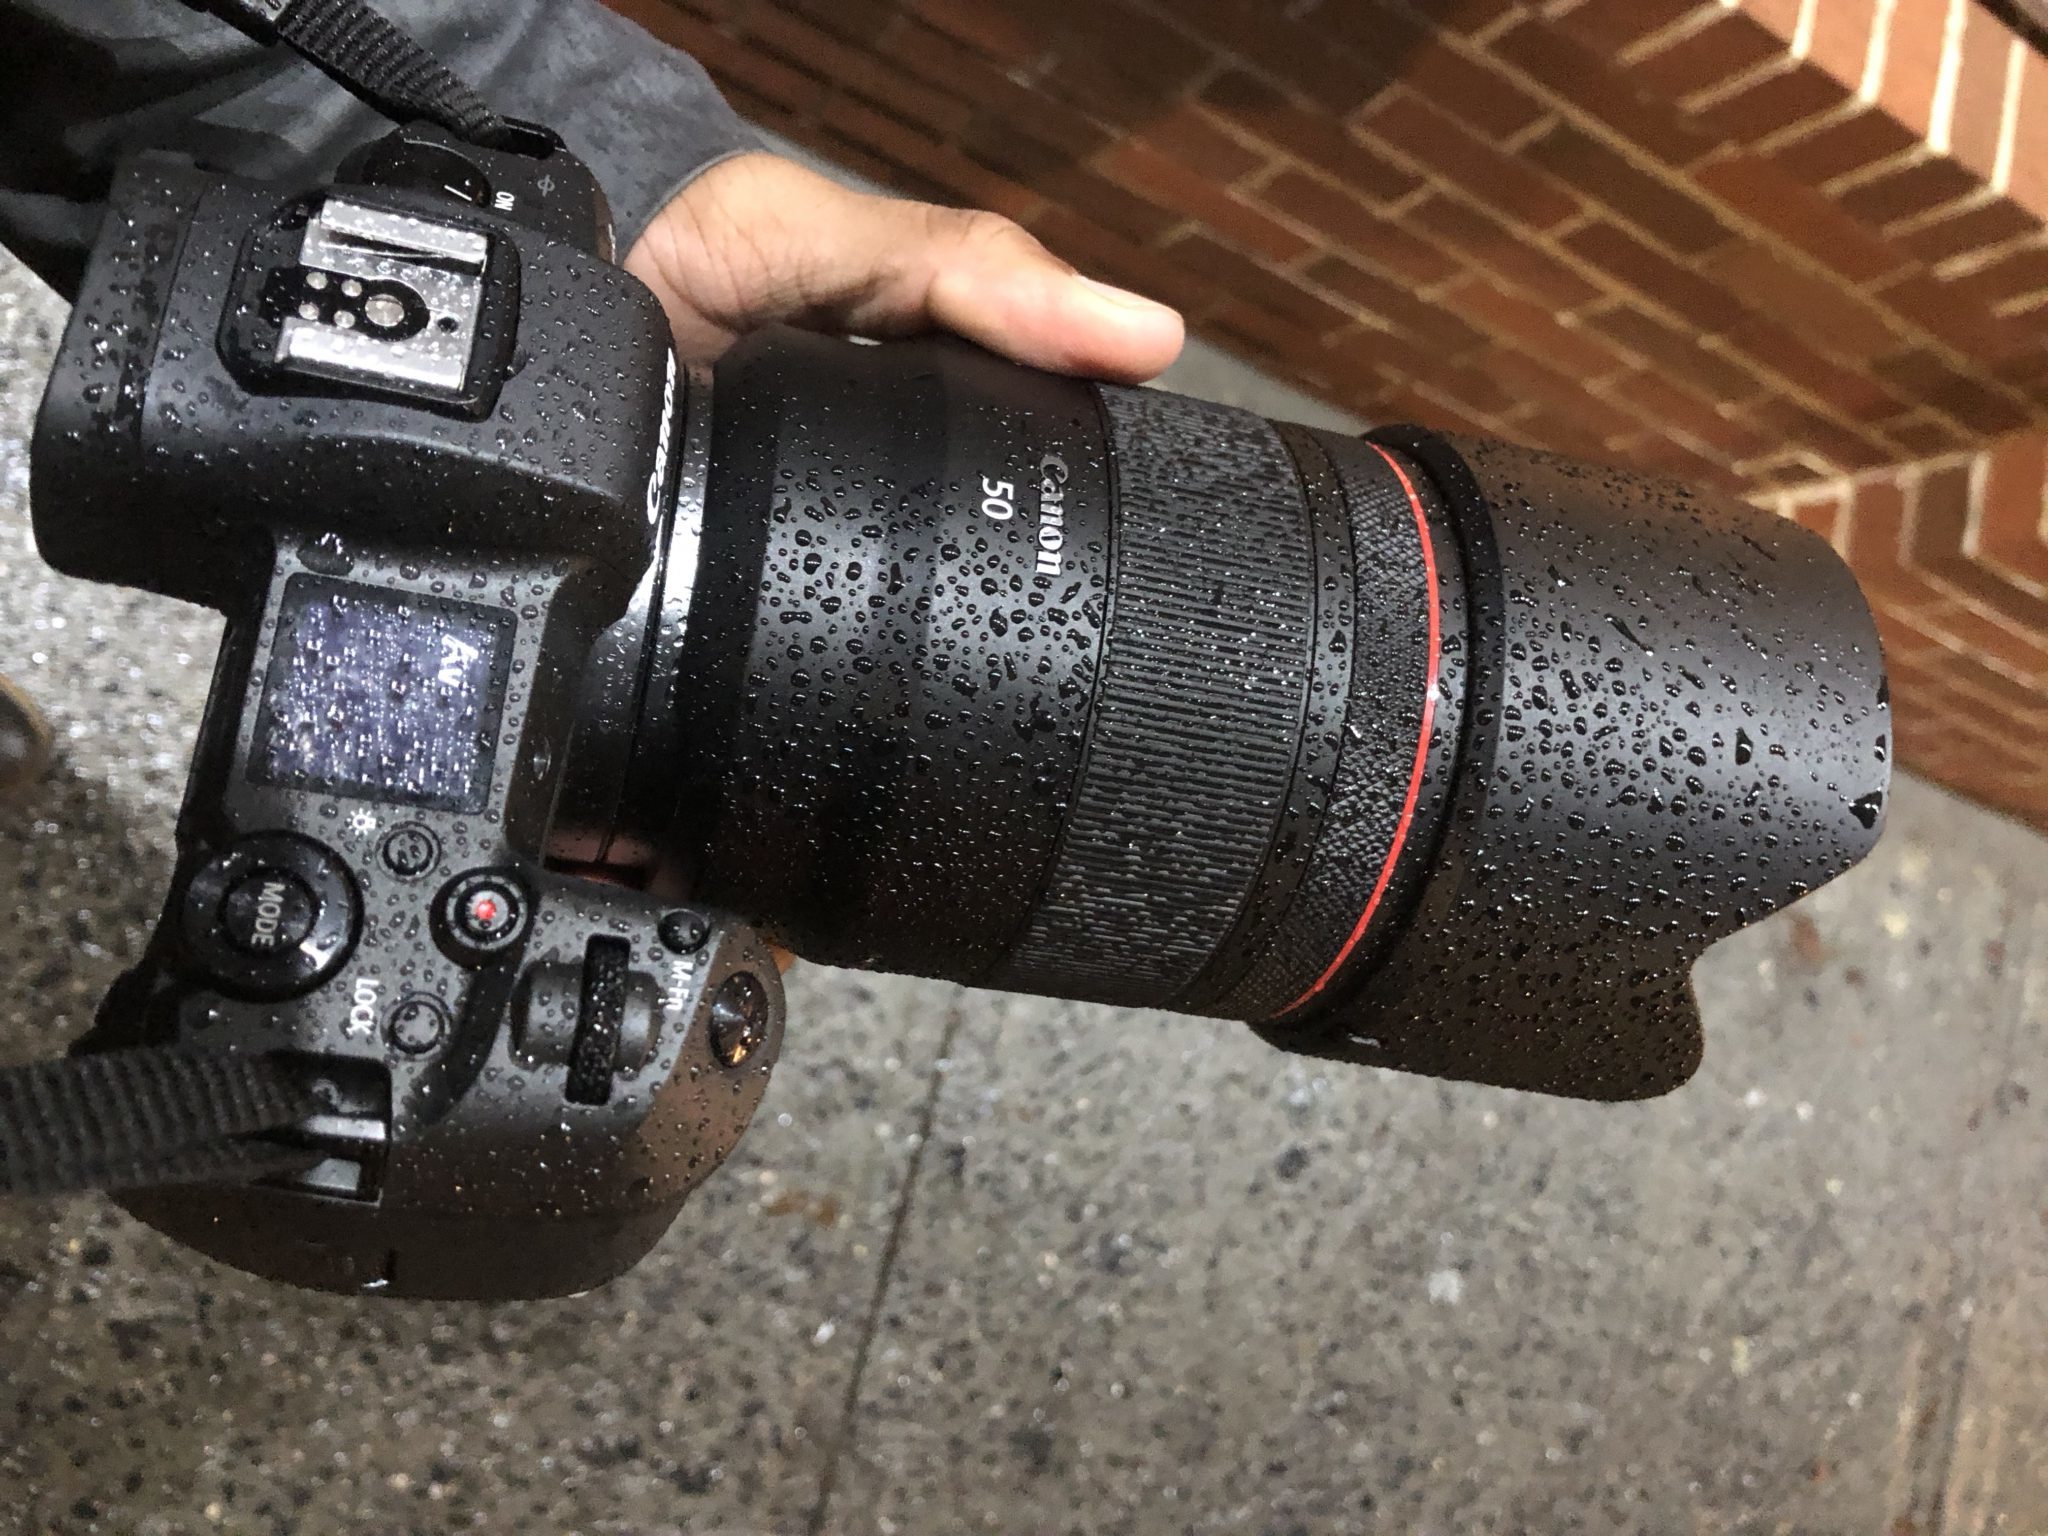 Guide: The Best Weather-Sealed Photography Gear For All Photographers